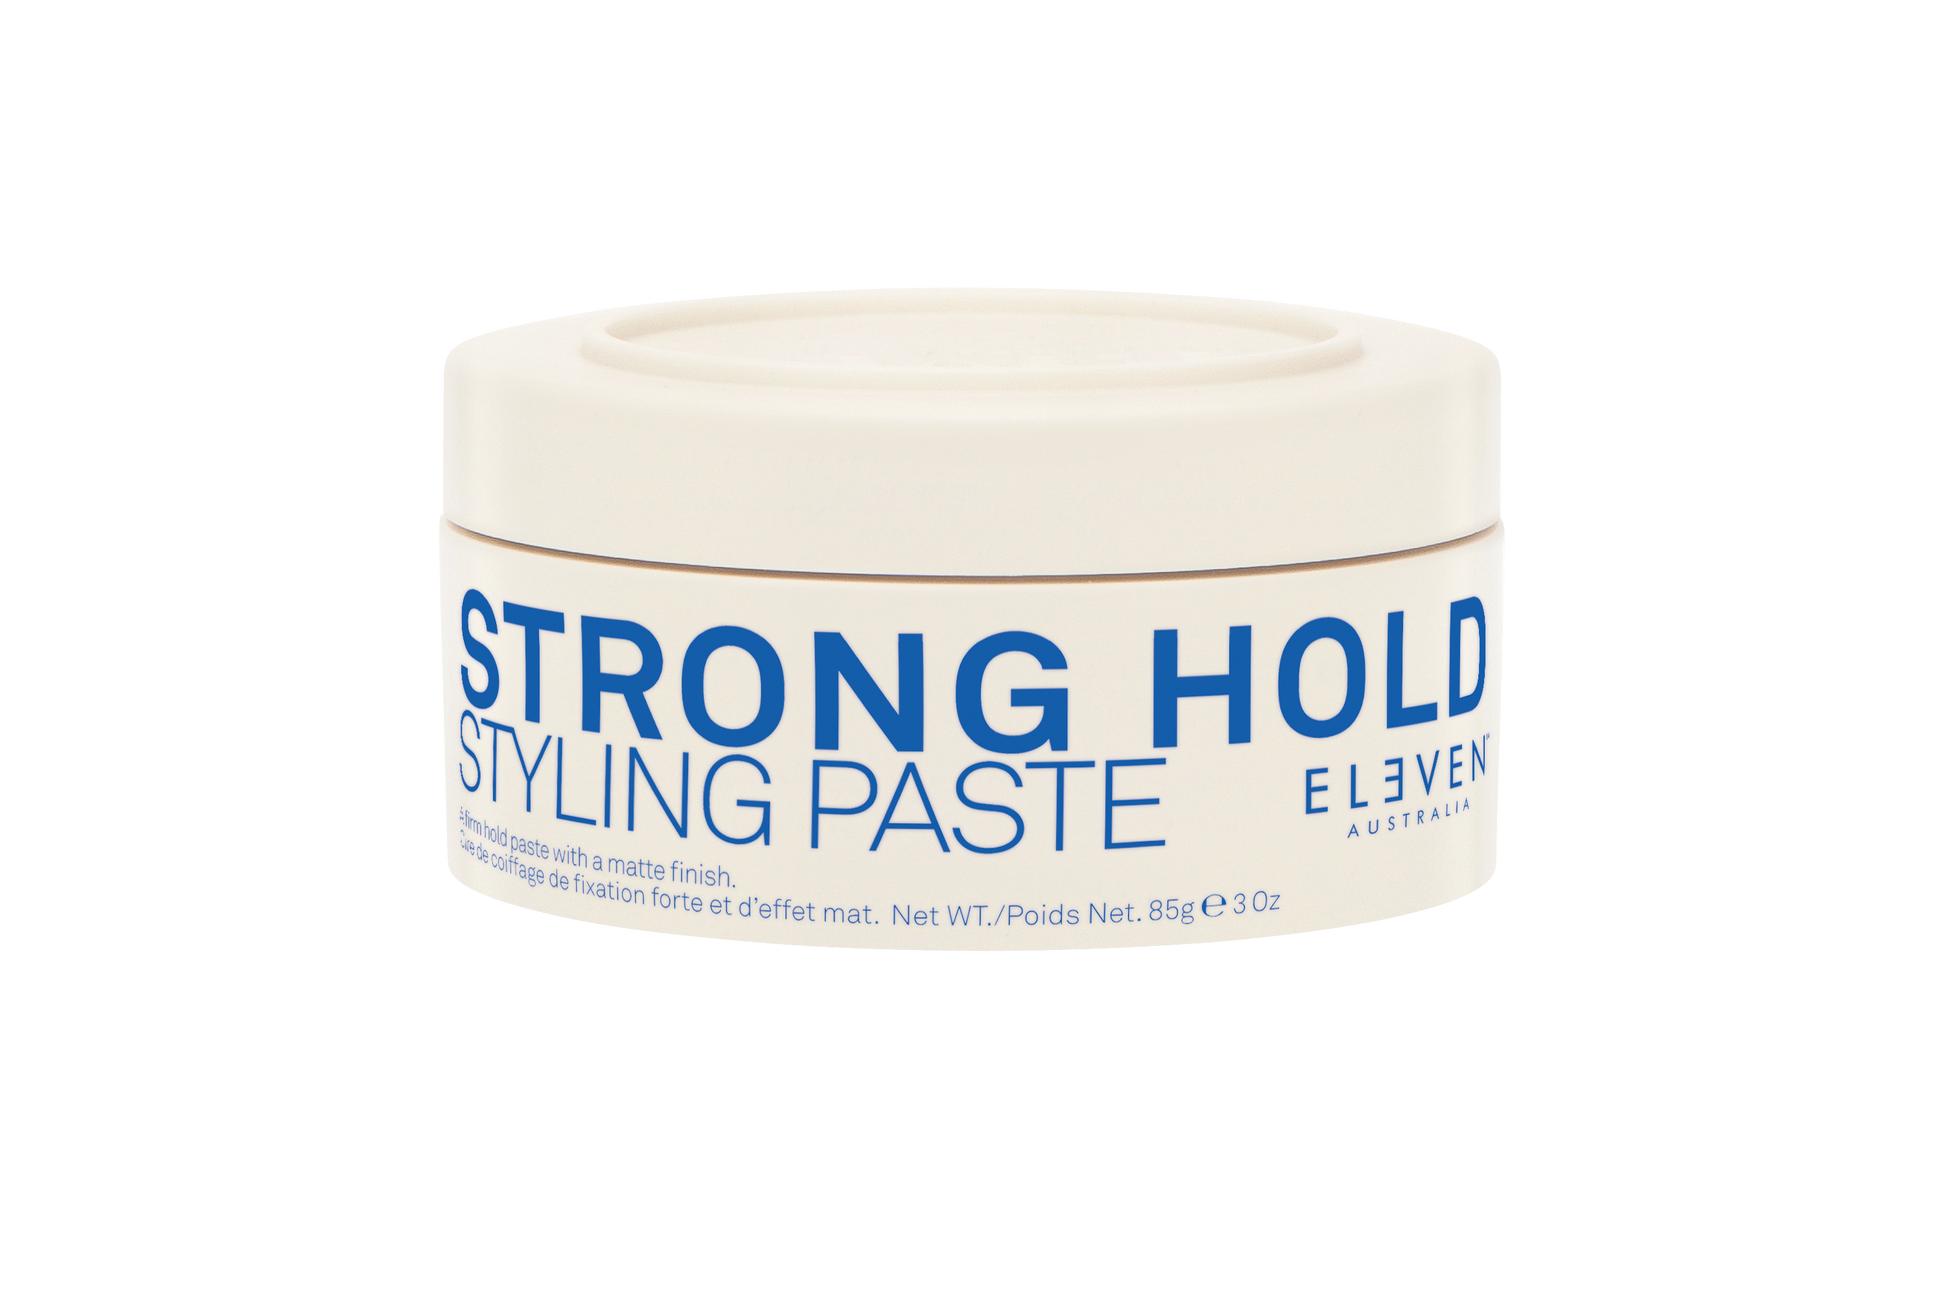 Eleven Australia STRONG HOLD STYLING PASTE - AQC Salon